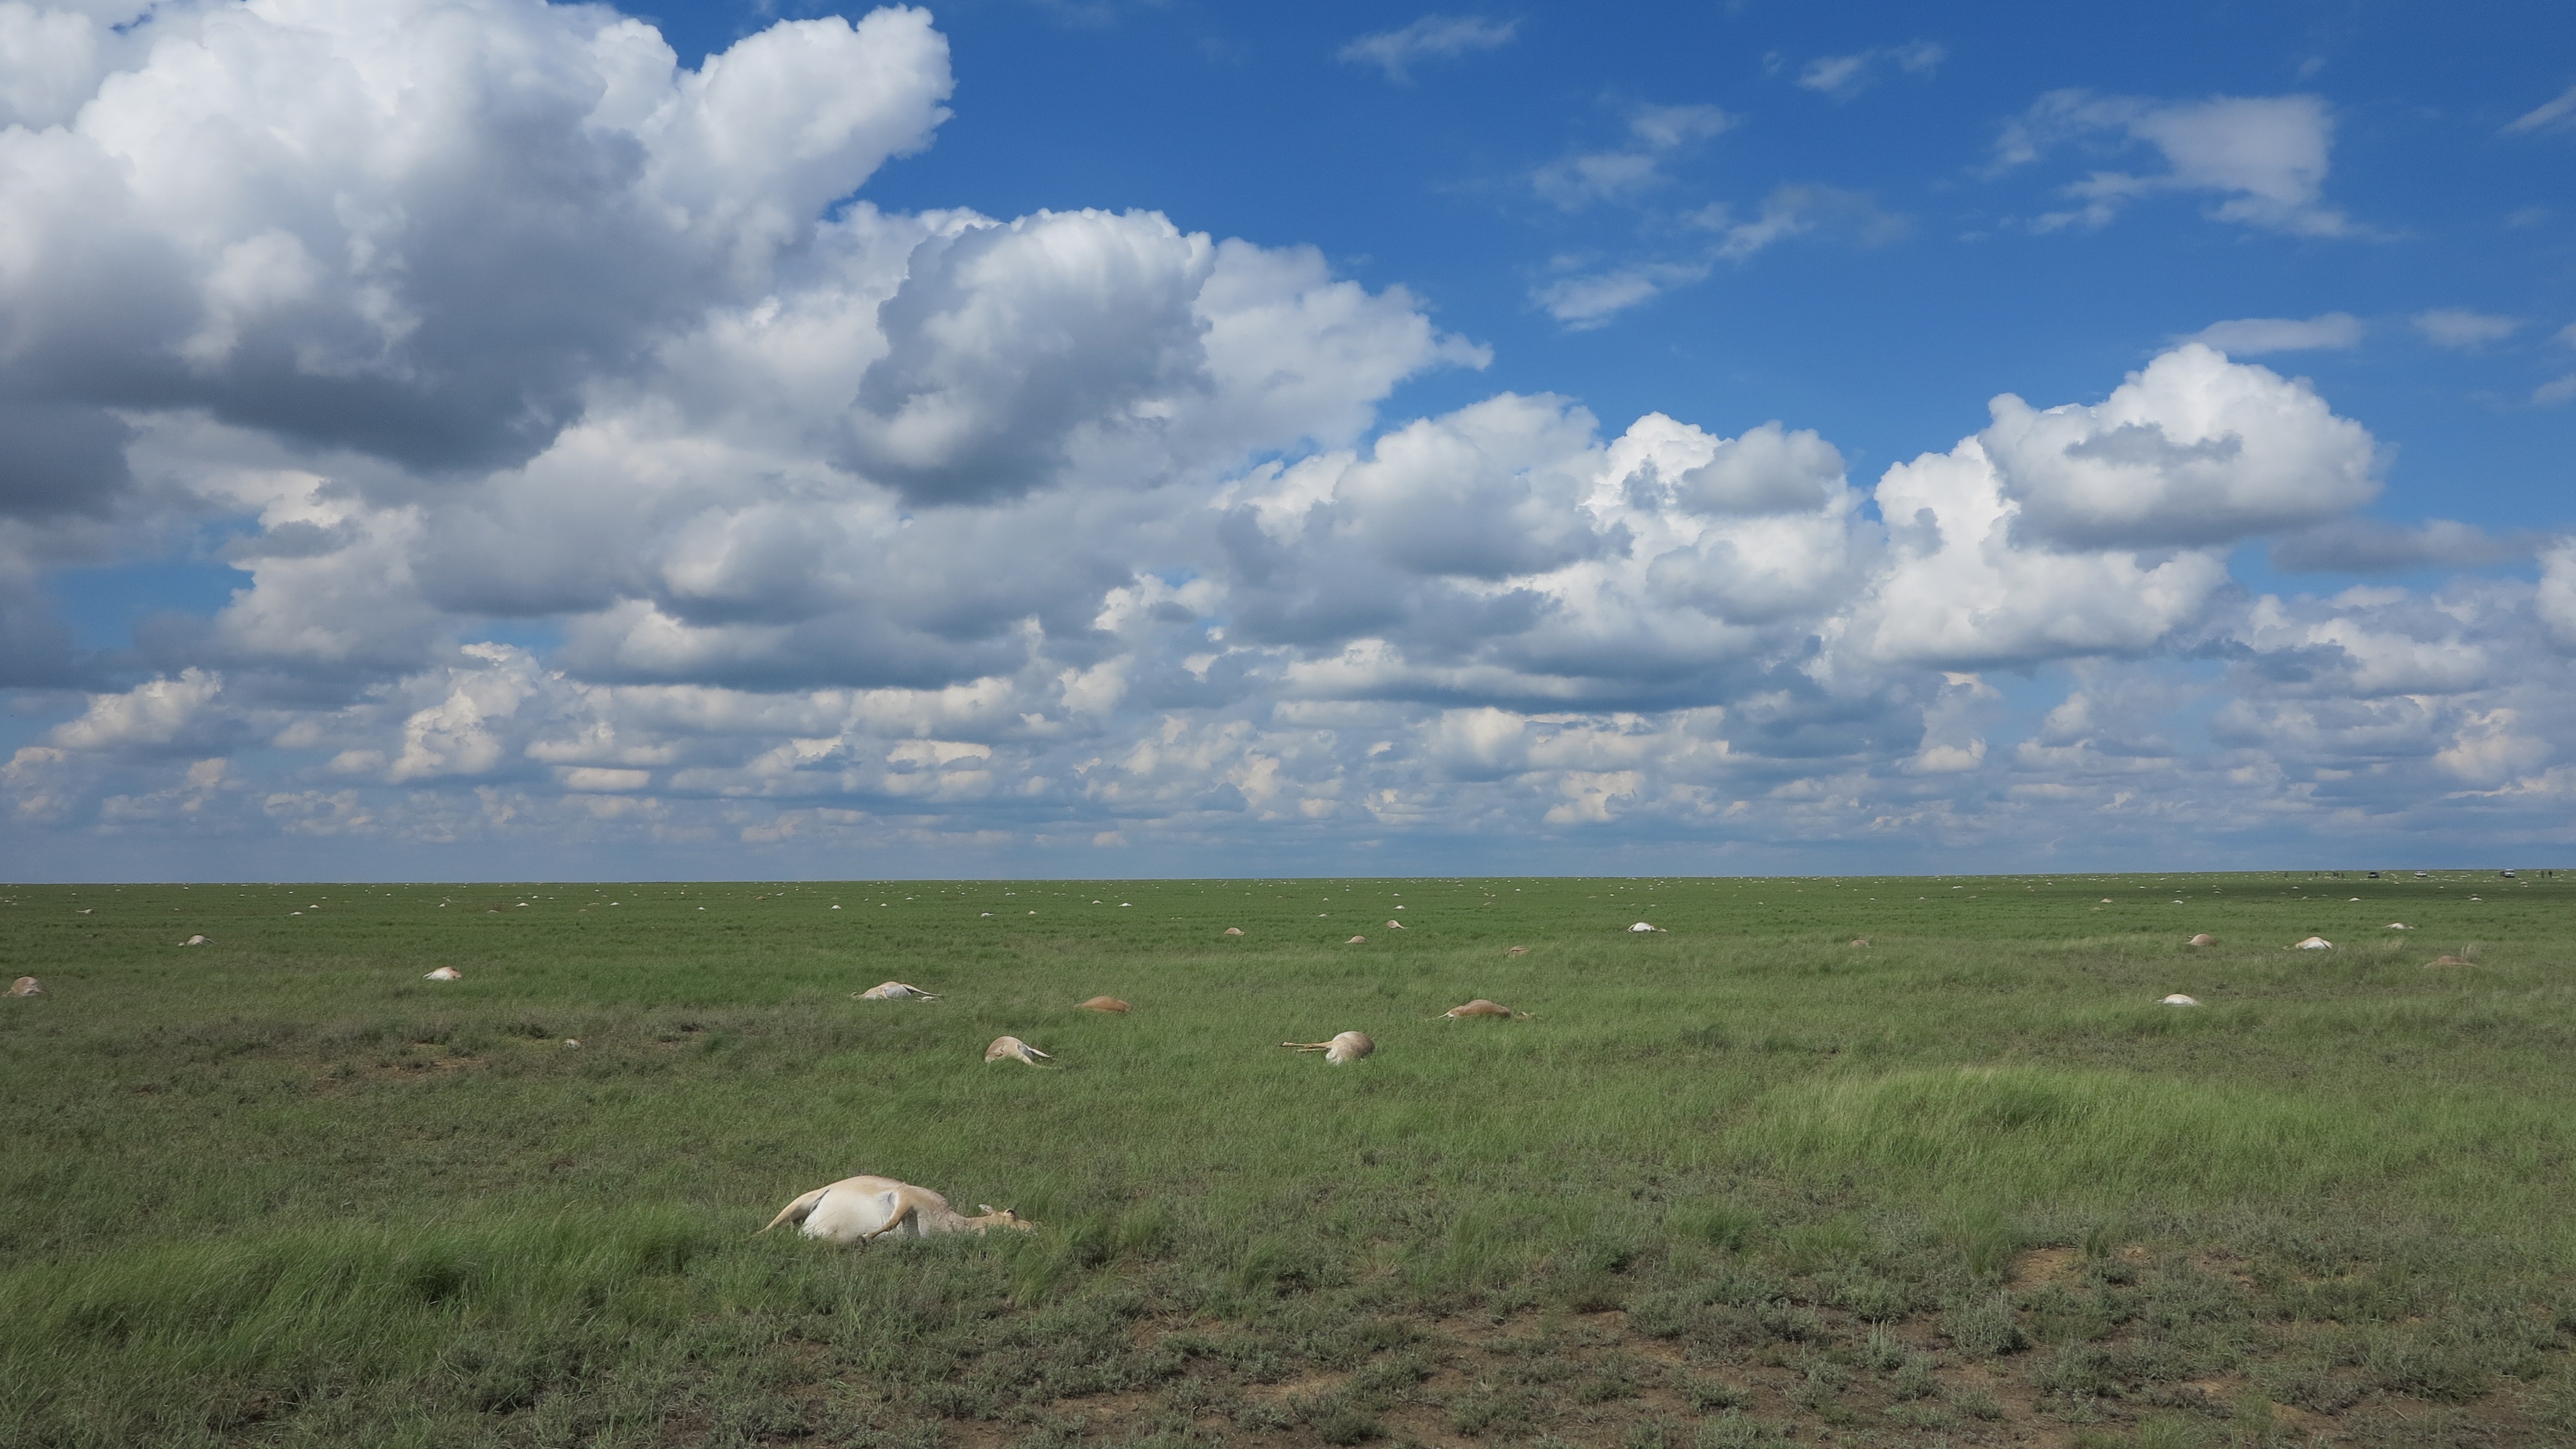 The affected herd on the steppe